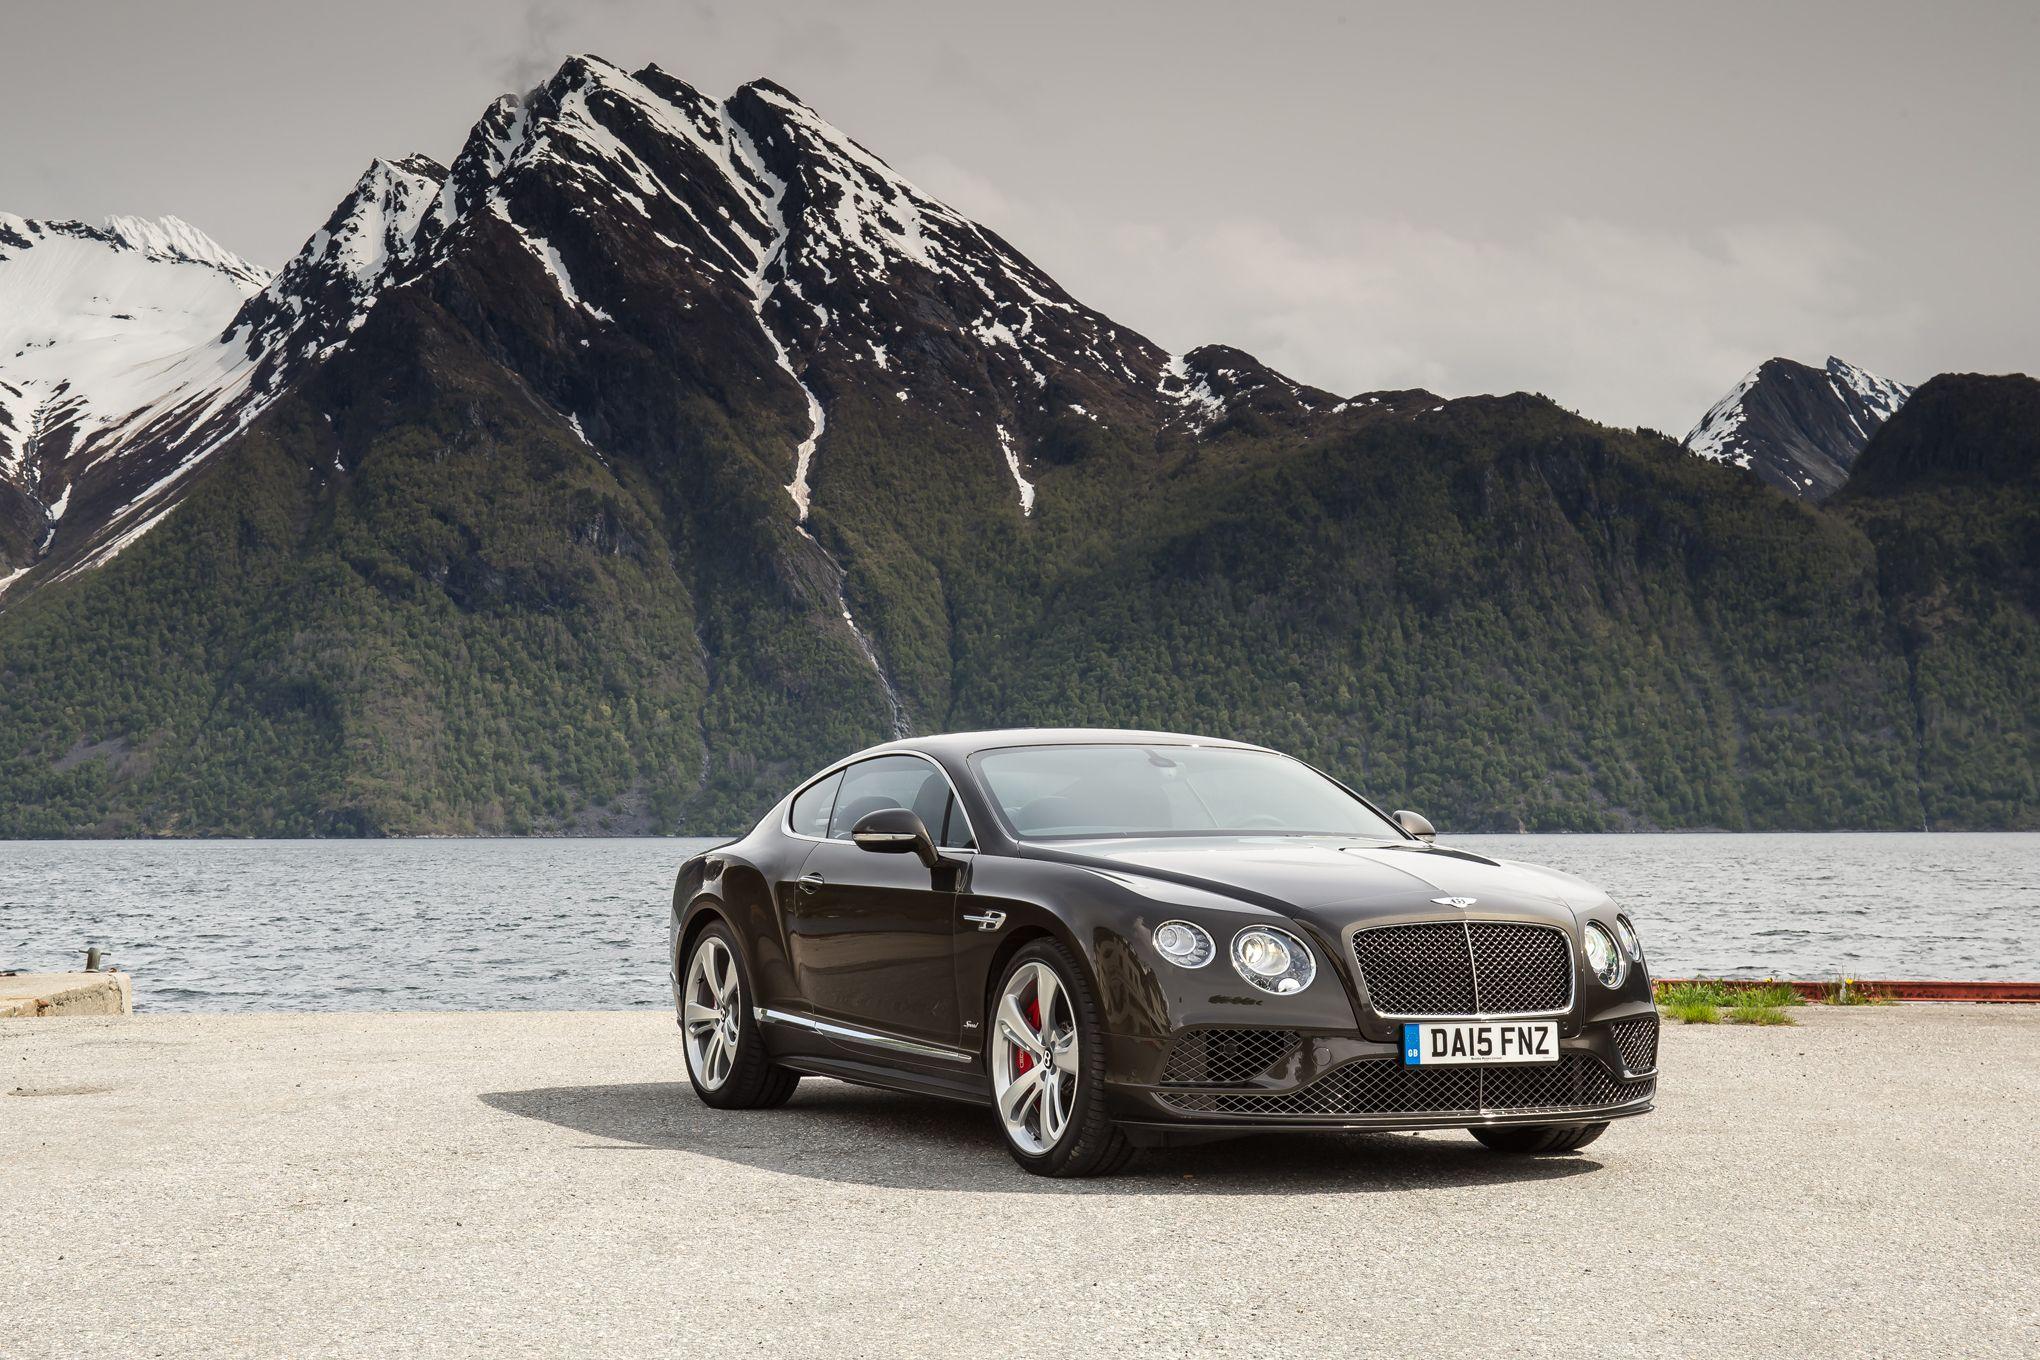 Bentley Mulsanne Grand Convertible Due Soon; New Continental by